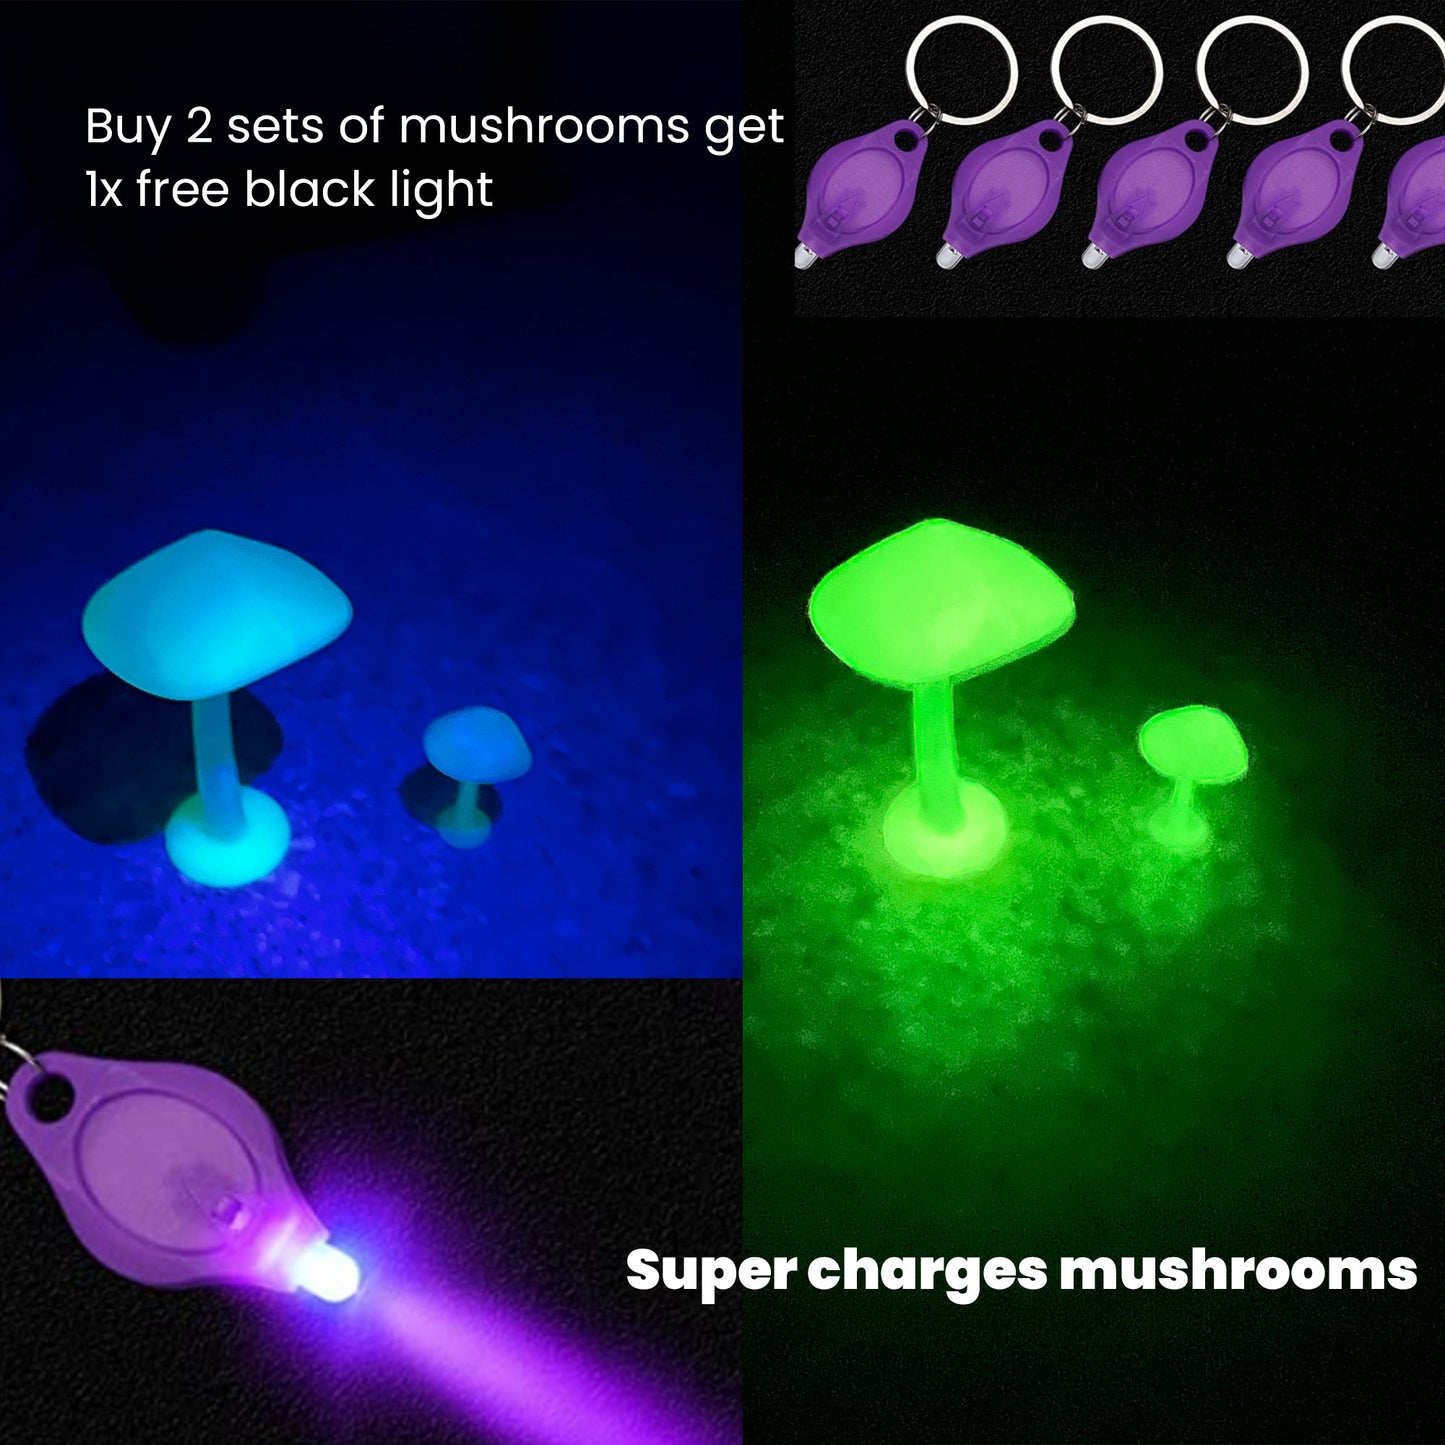 GLOW In The DARK Mushrooms | For Terrariums with Crested Geckos, Leopard Geckos, Isopods and more! 4 PACK - Wild Pet Supply